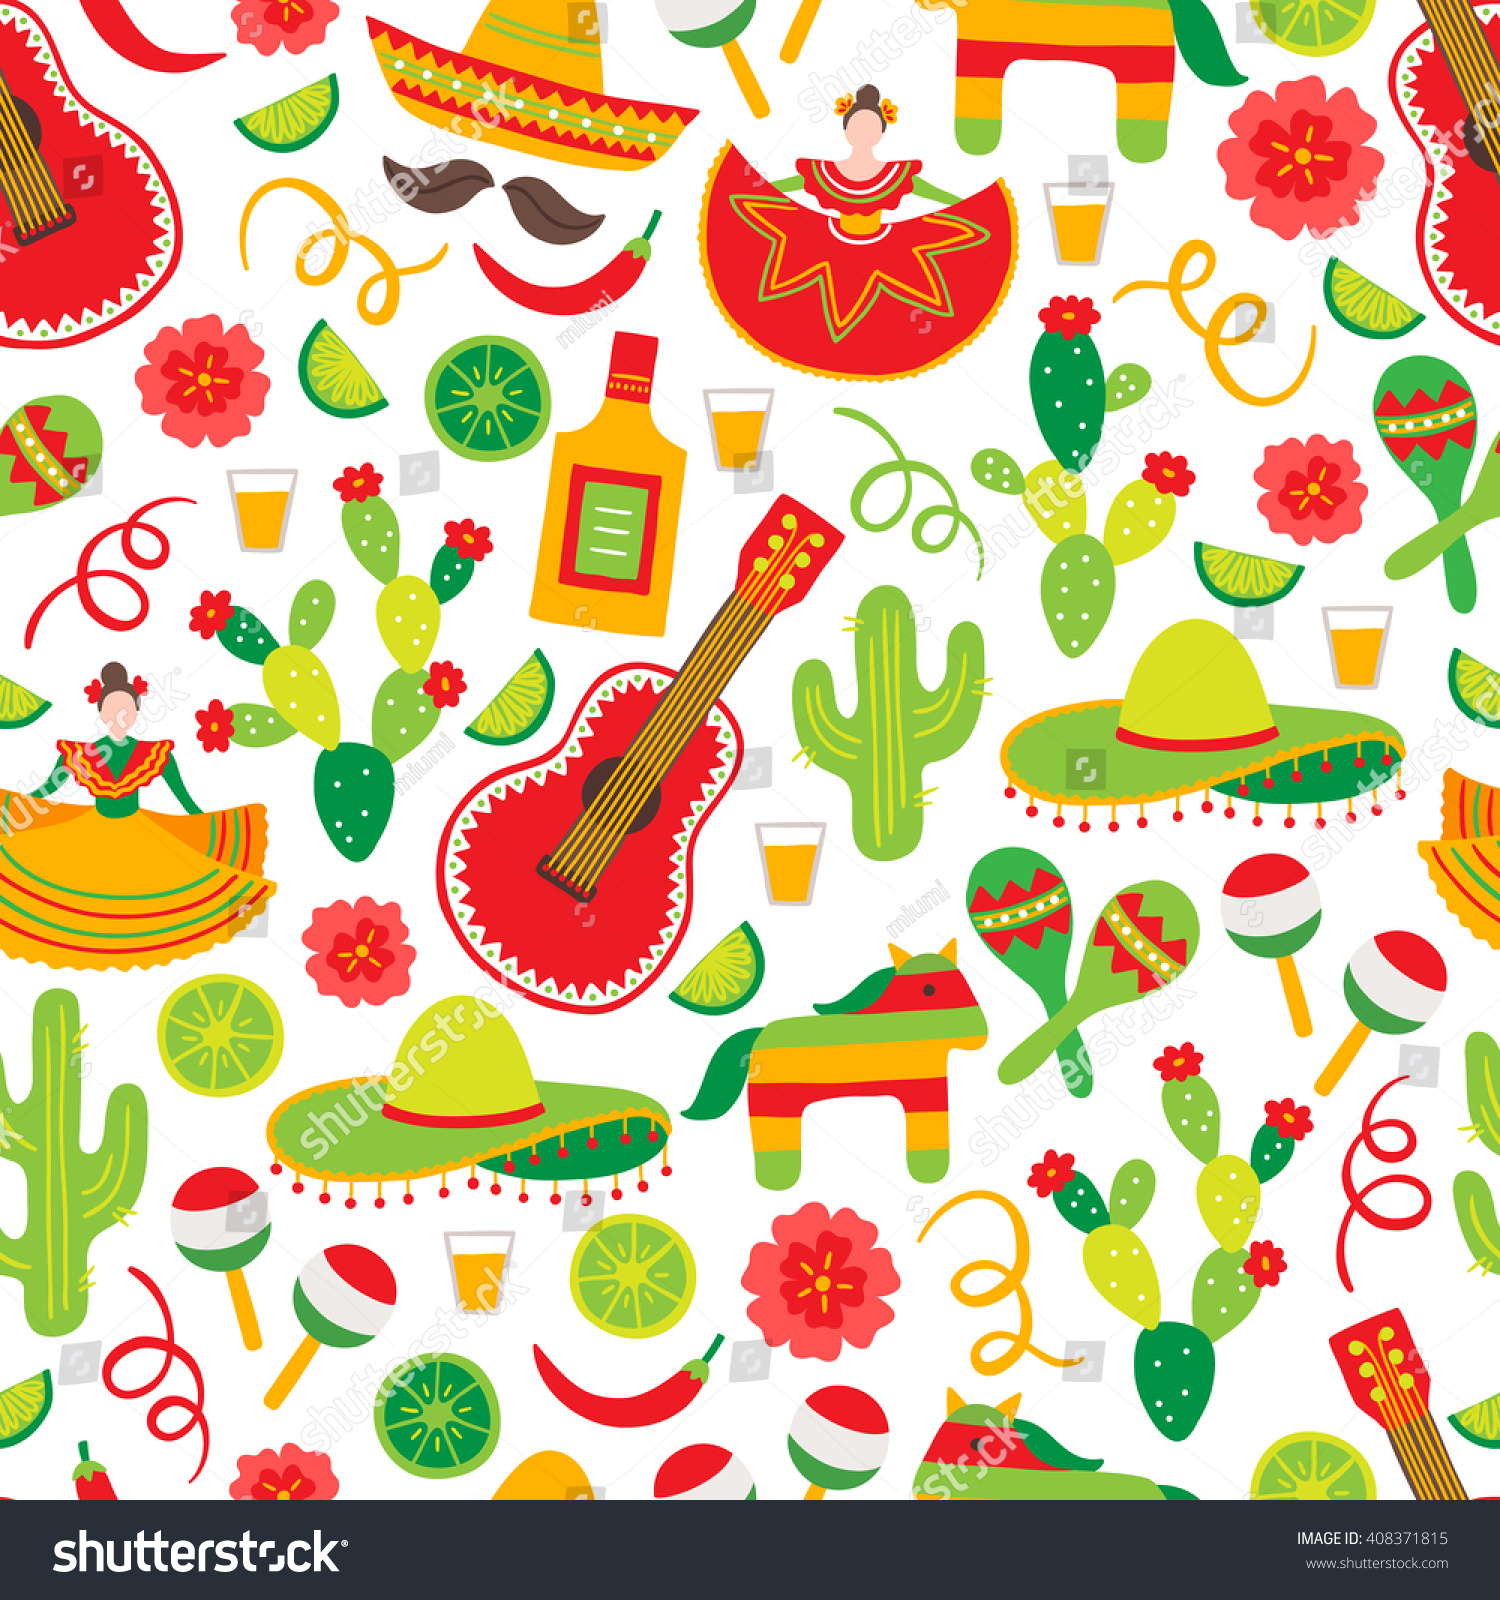 35 Cinco de Mayo Zoom Backgrounds  Free Download  The Bash